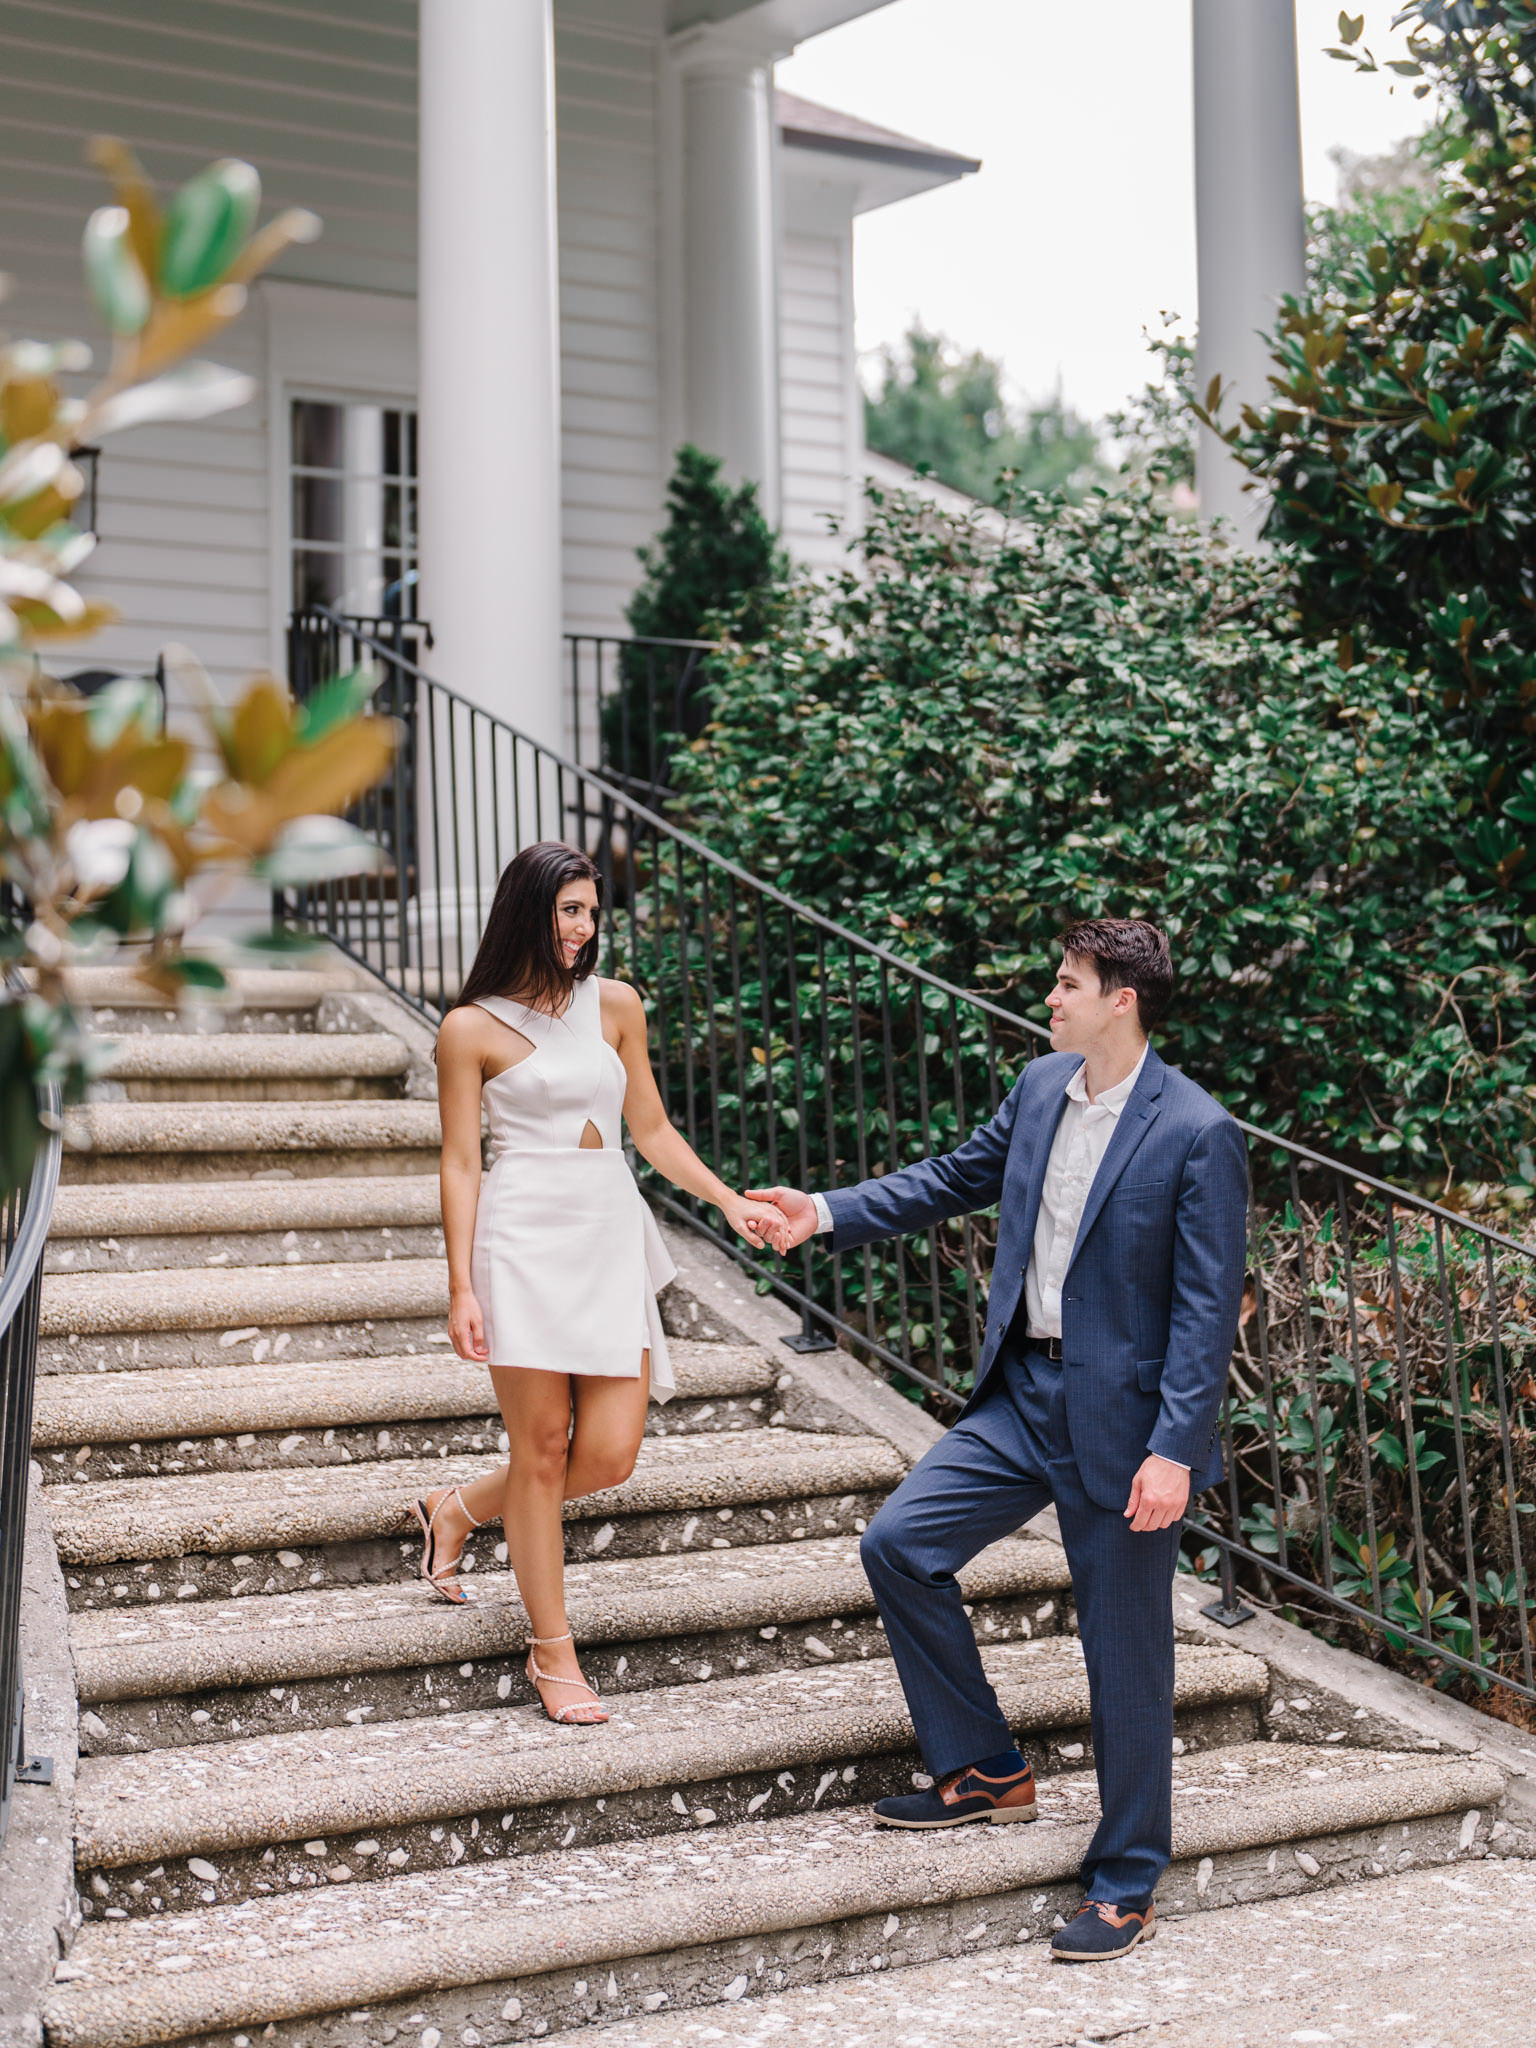 The Sweetest Summer Engagement at Caledonia in Pawleys Island